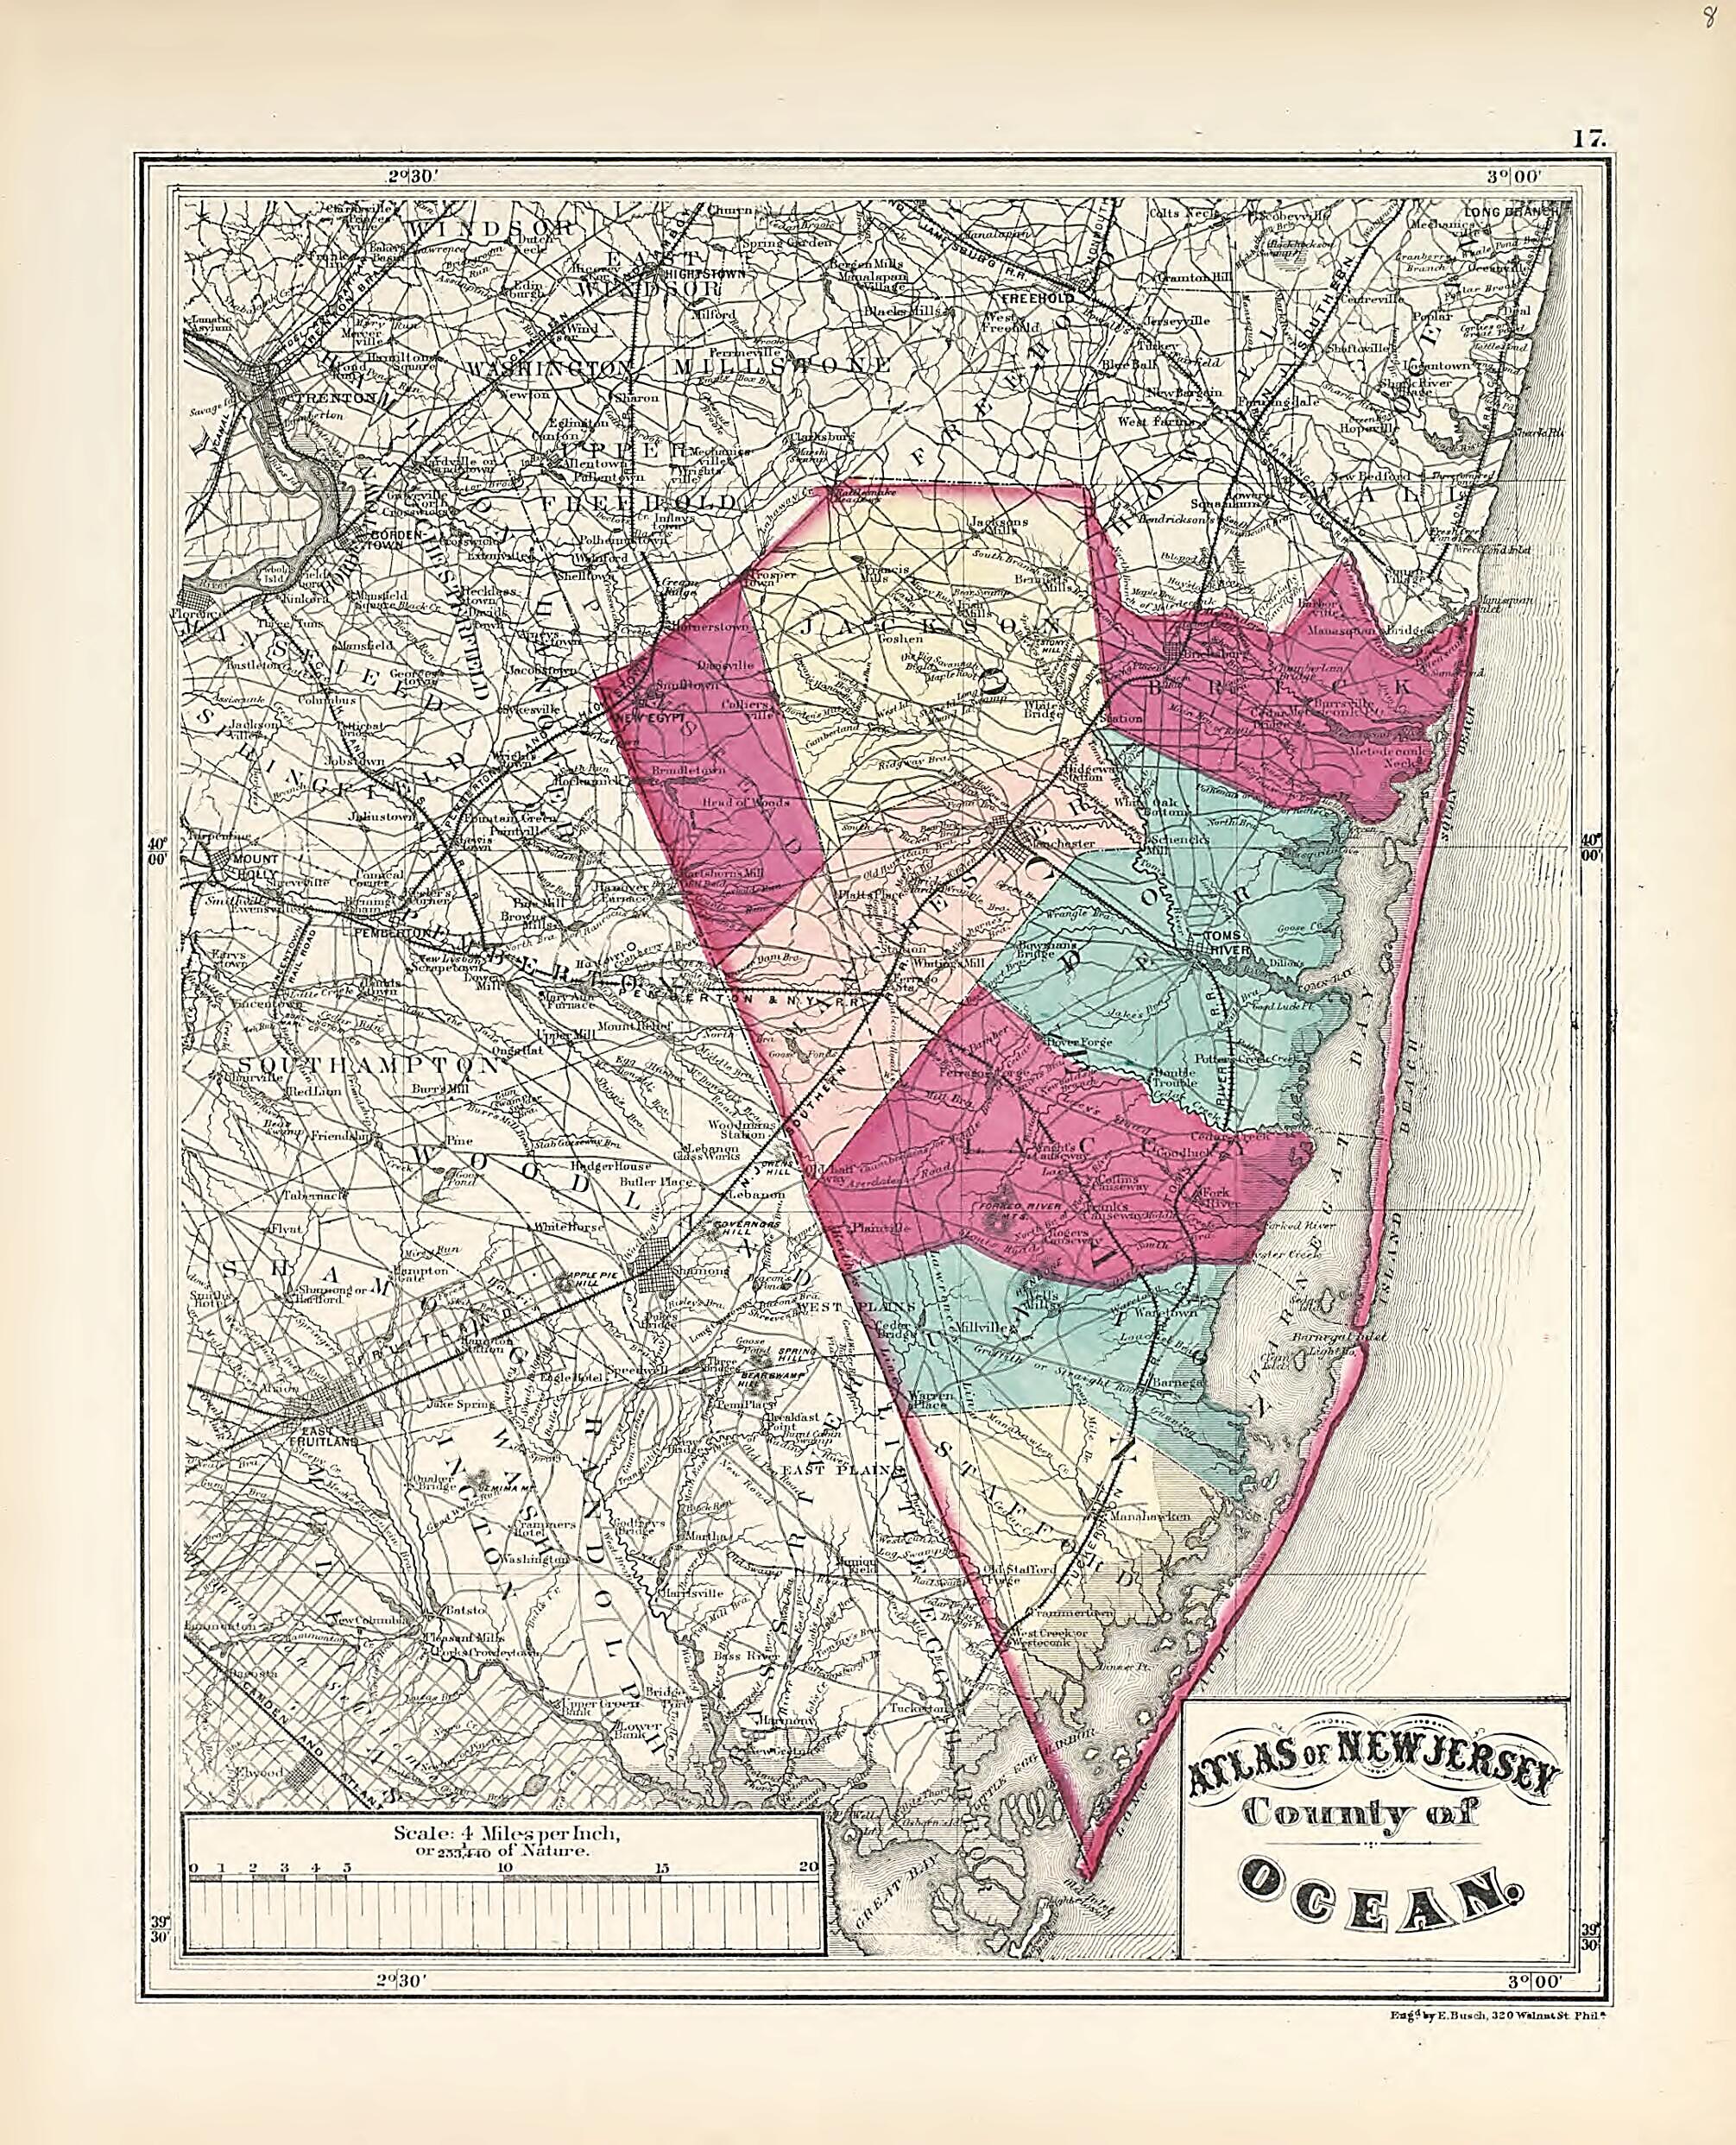 This old map of County of Ocean from Atlas of the Late Township of Greenville, and the State of New Jersey from 1873 was created by Griffith Morgan Hopkins in 1873